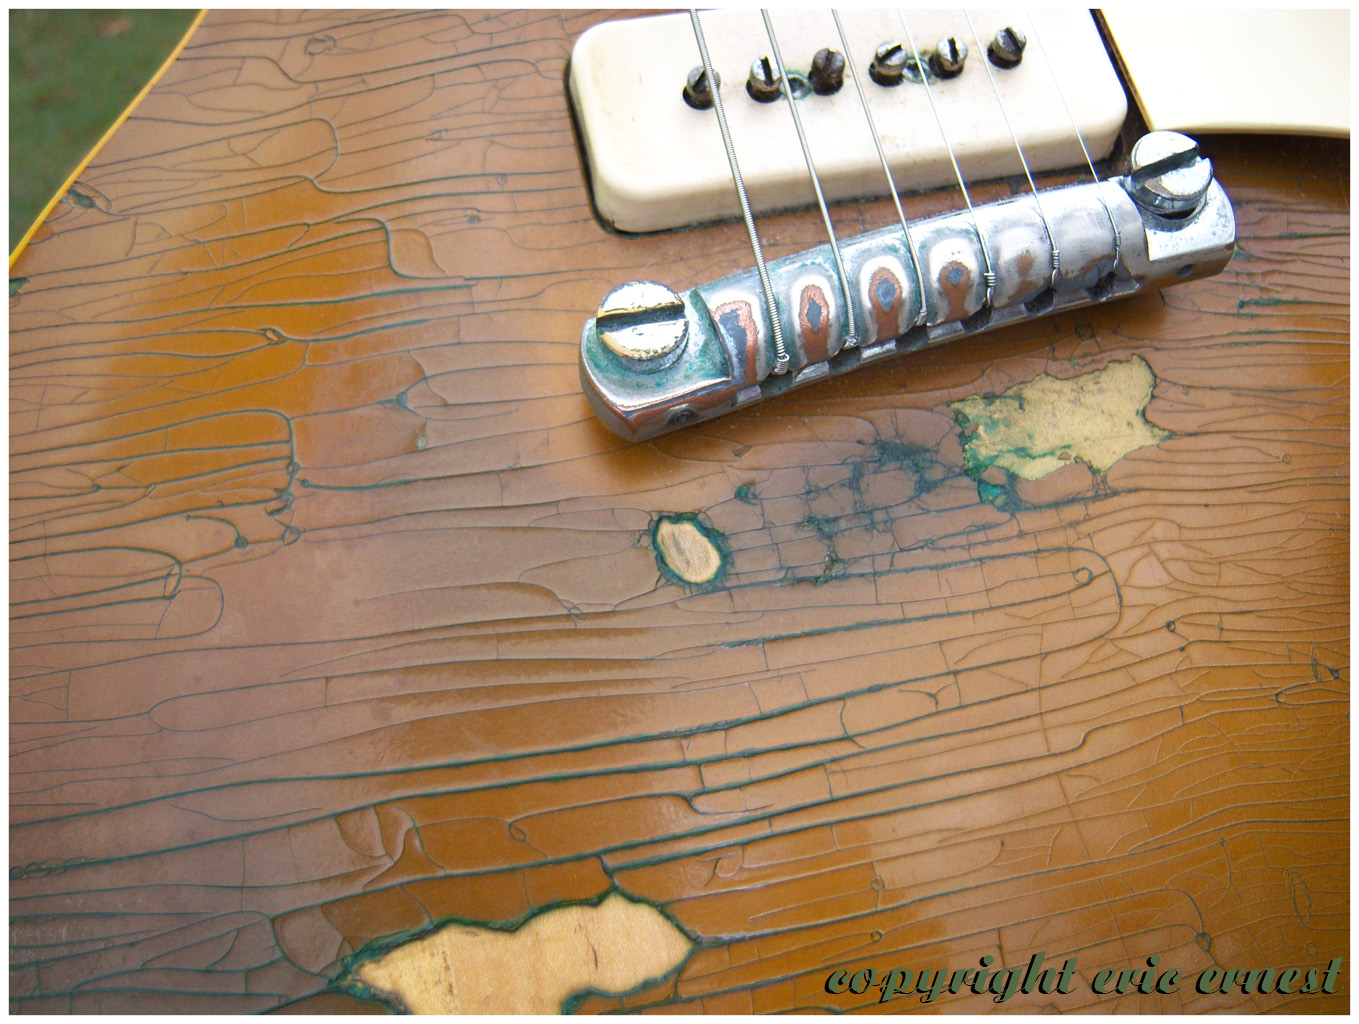 1954 Gibson Les Paul Standard Model Guitar. The well loved and worn road warrior.